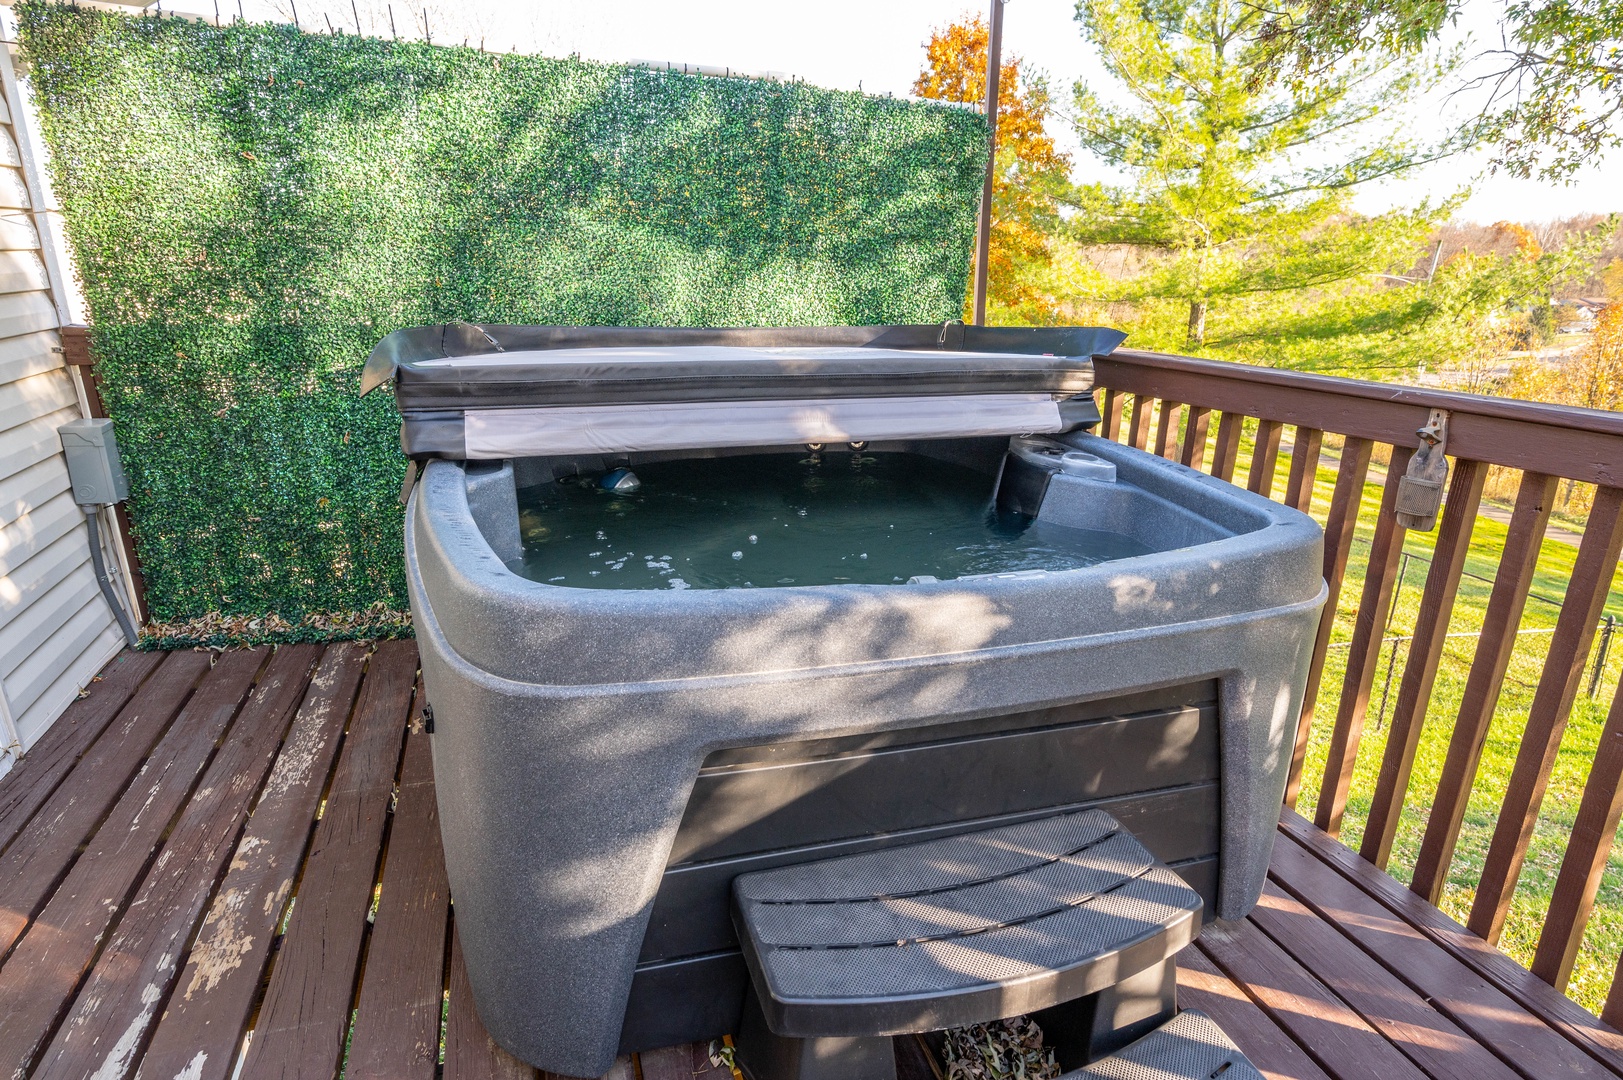 Soak all your cares away in the private hot tub on the back deck